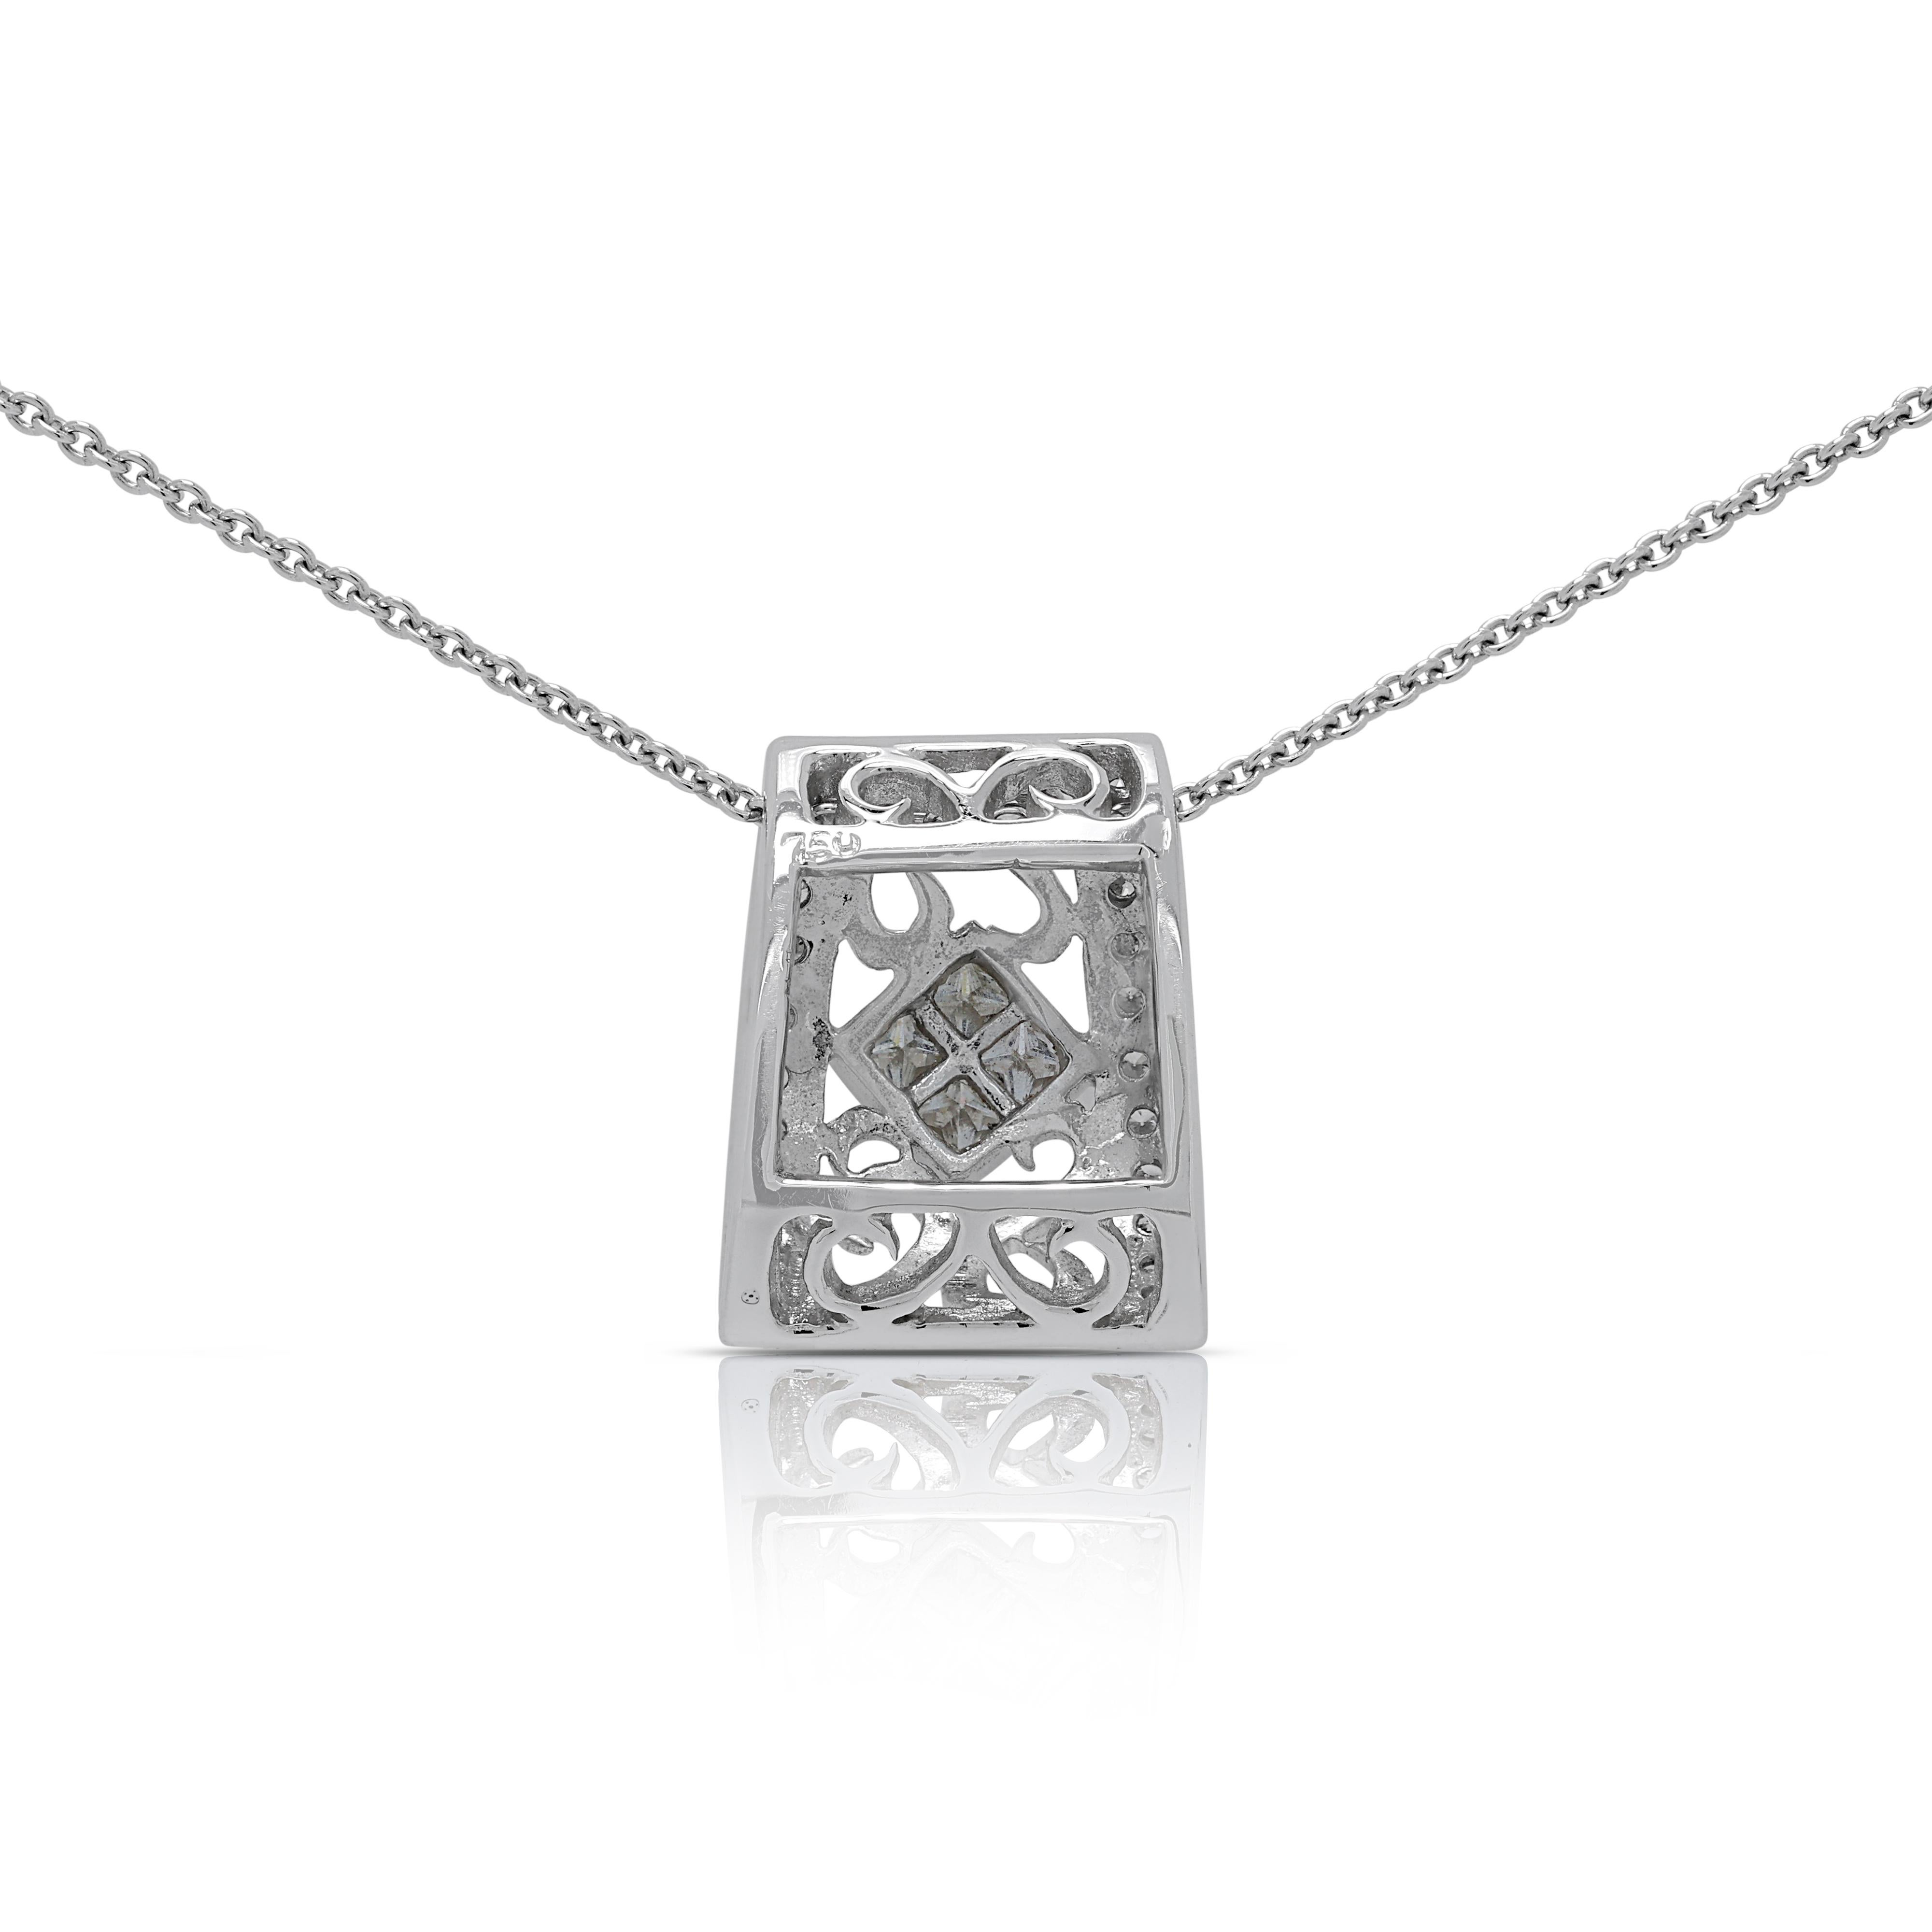 Luminous 0.30ct Diamonds Pendant in 18K White Gold - (Chain not Included) For Sale 2